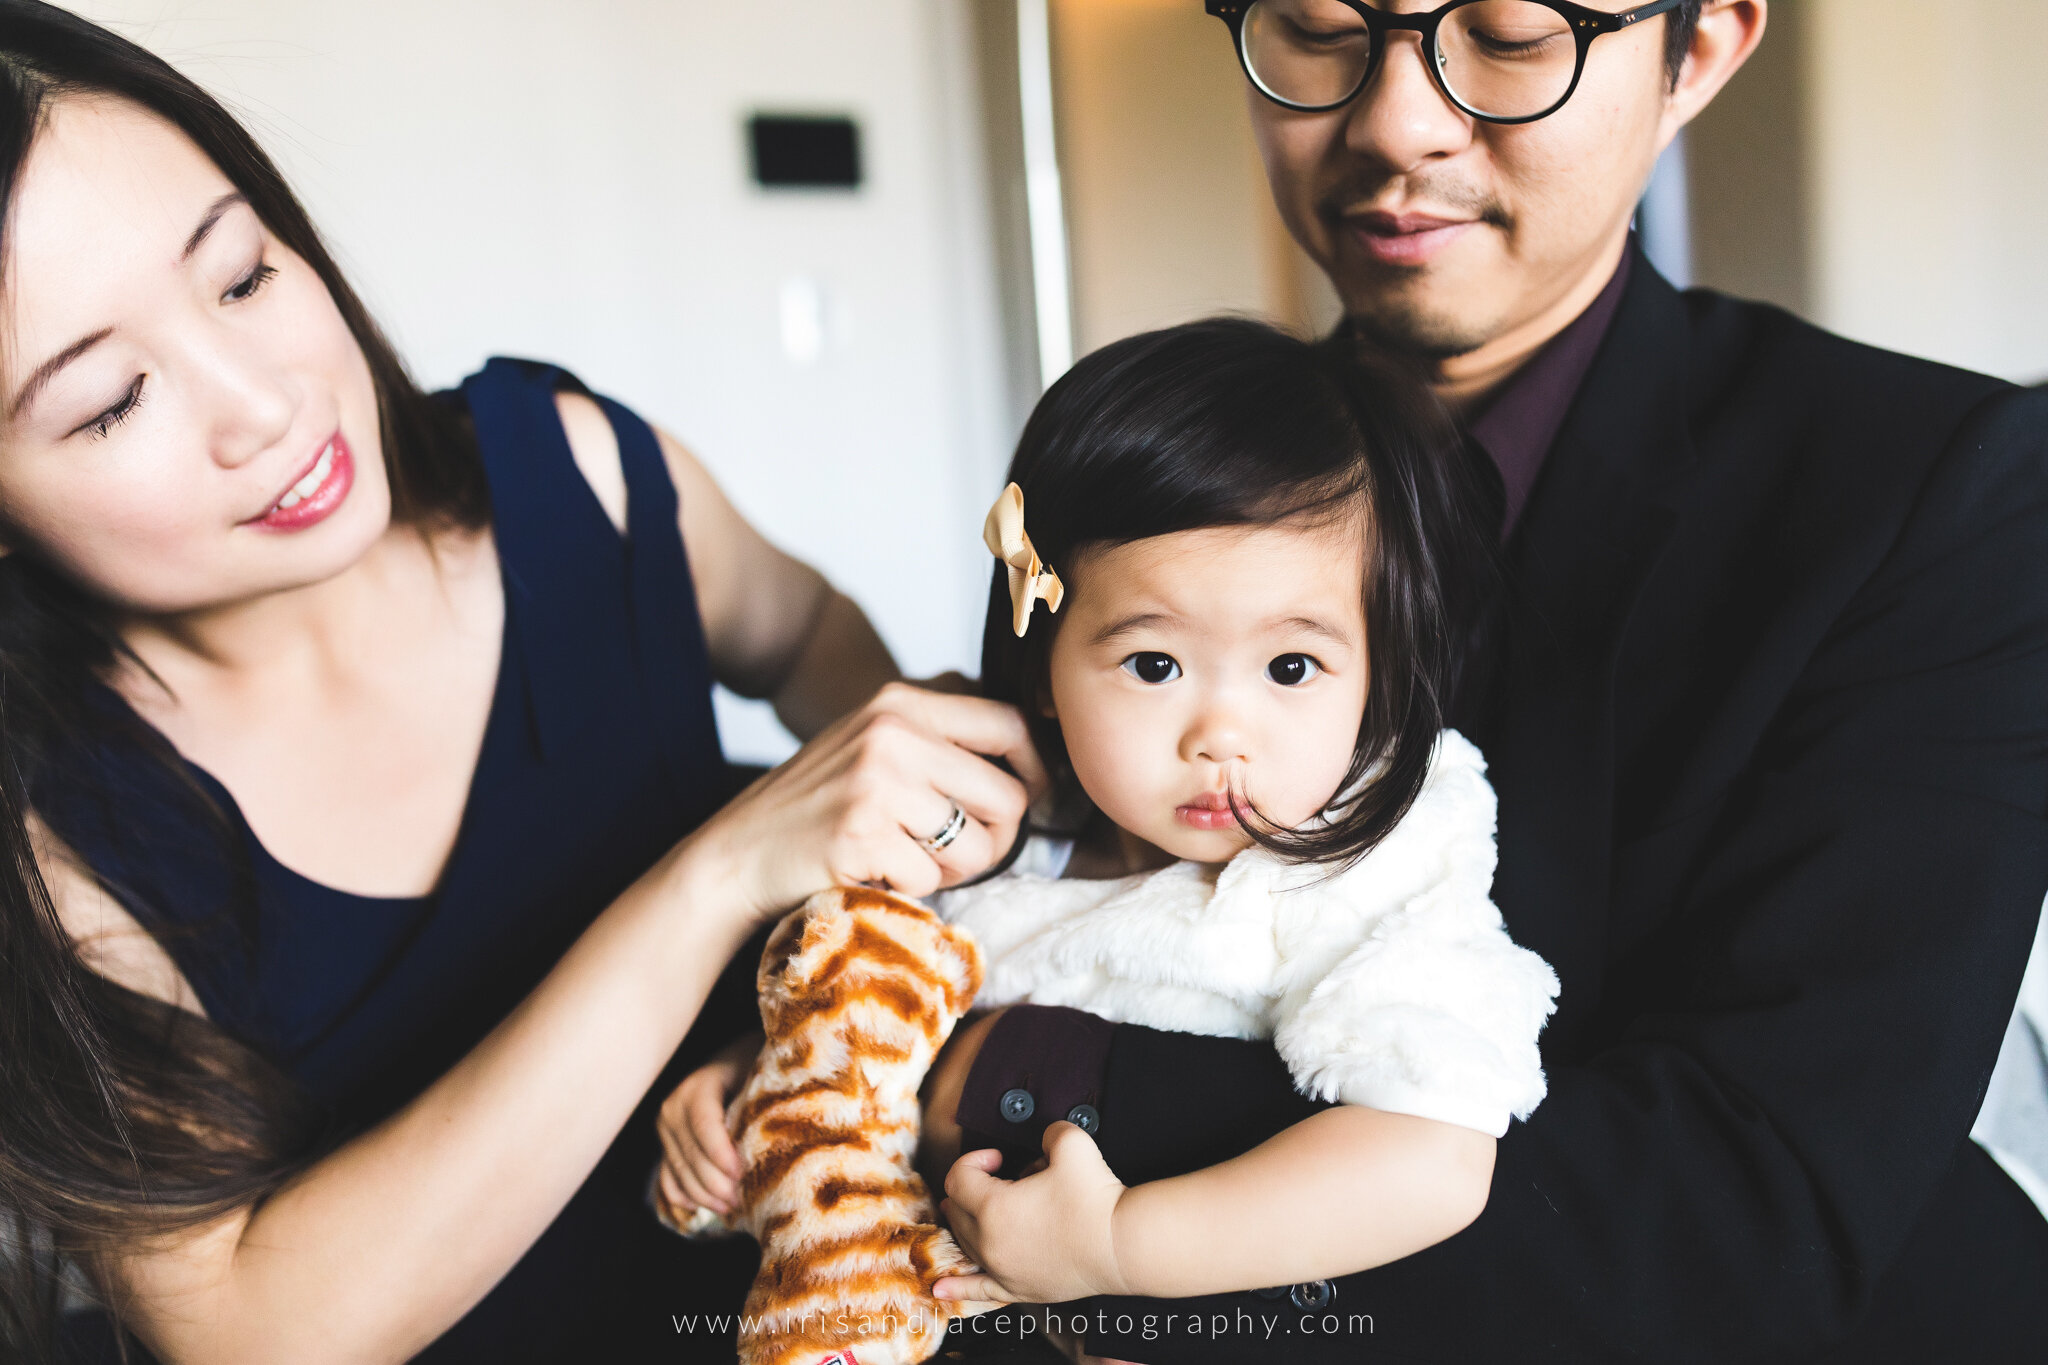 Lifestyle Photos in Silicon Valley, Menlo Park Home  |  Iris and Lace Photography  |  SF Bay Area Family Photographer